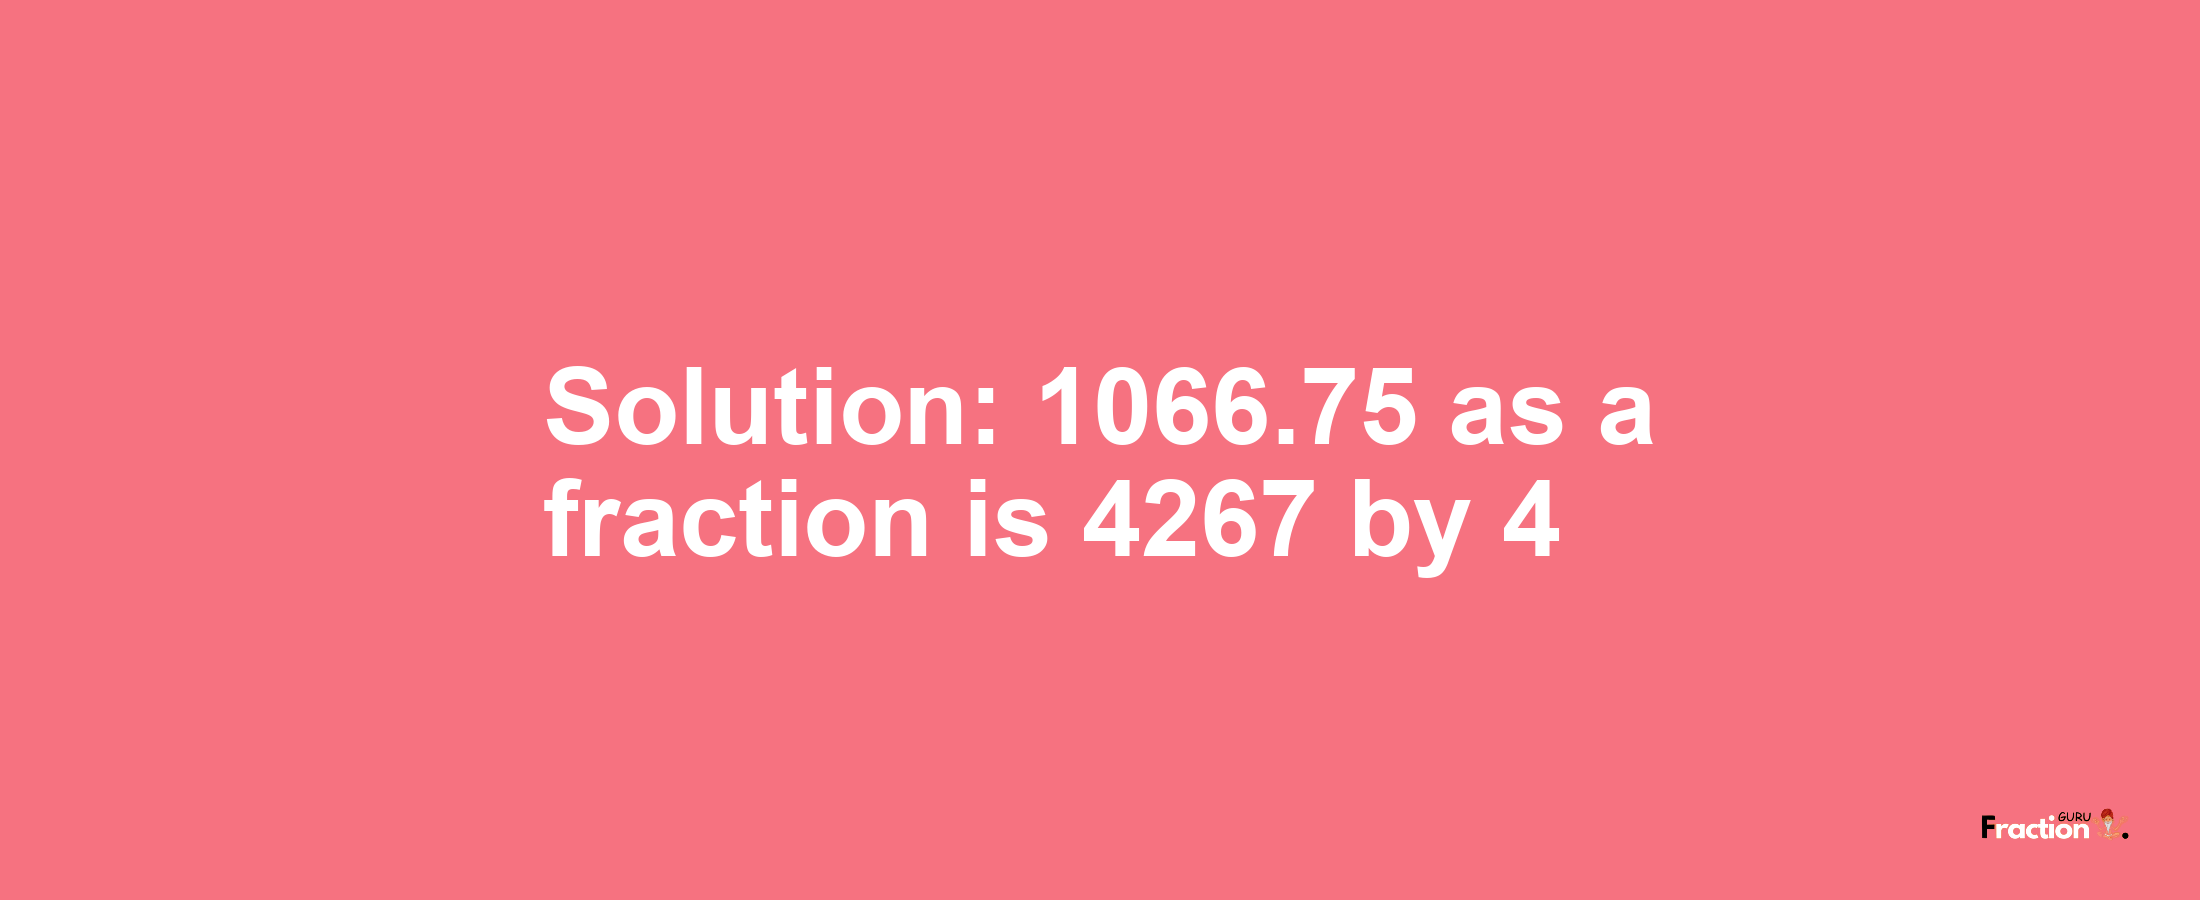 Solution:1066.75 as a fraction is 4267/4